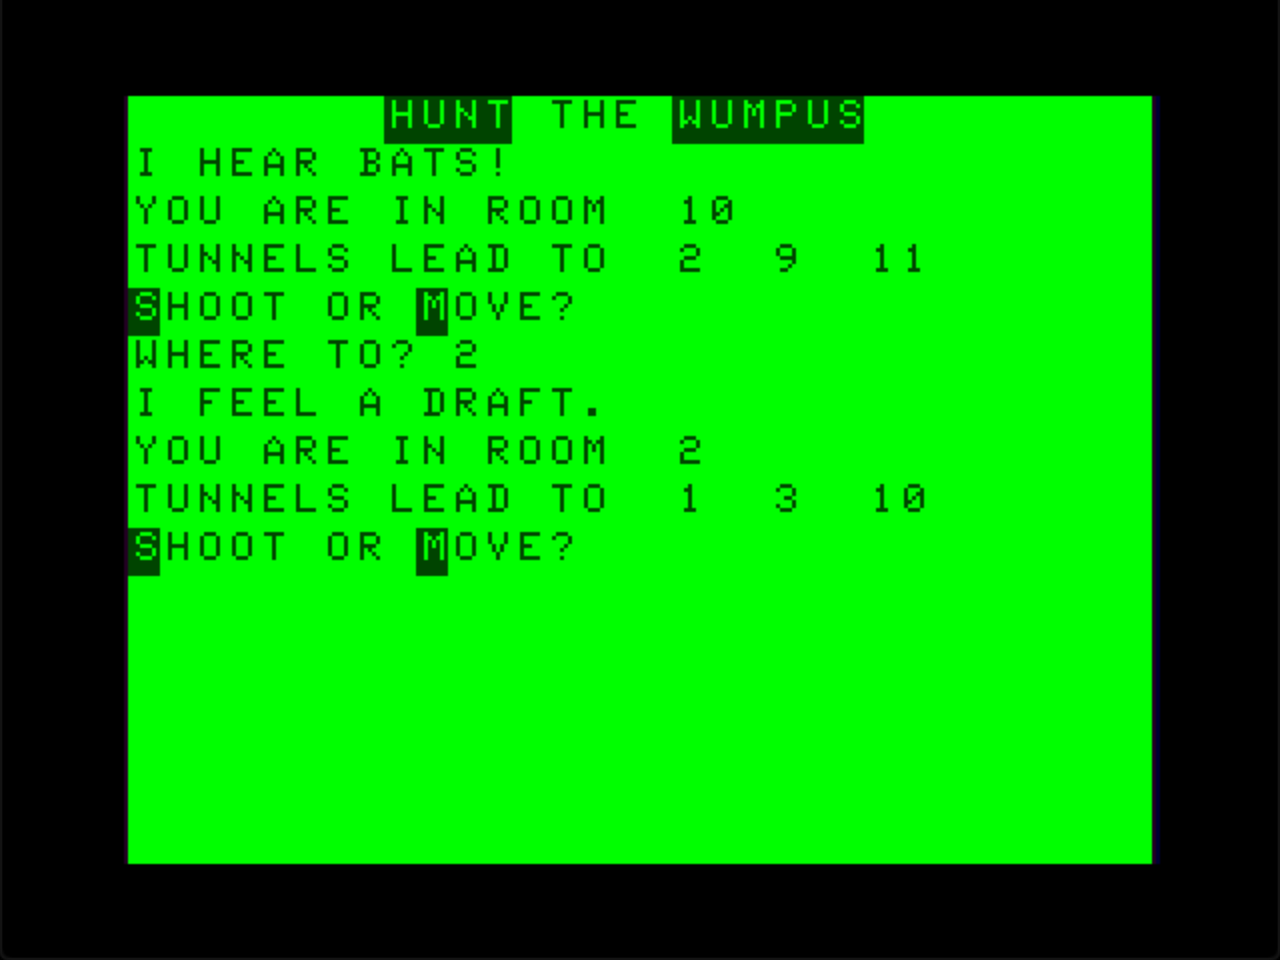 Bats, Drafts, and Wumpus: “I hear bats” and “I feel a draft” from the Color Computer Hunt the Wumpus.; Color Computer; CoCo, TRS-80 Color Computer; computer history